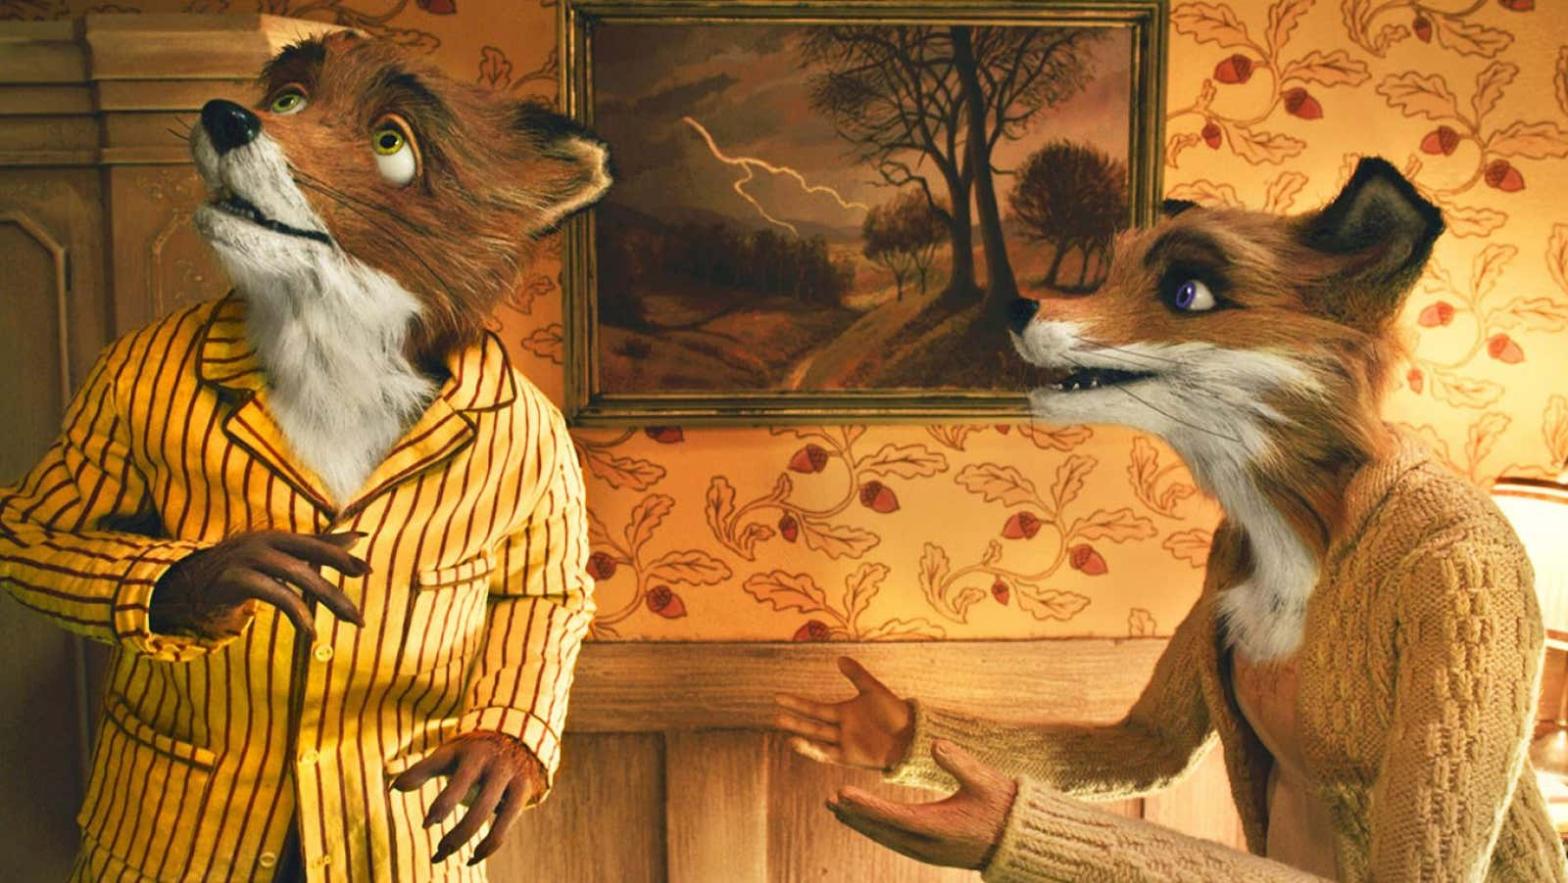 A scene from Wes Anderson's Fantastic Mr. Fox. (Image: 20th Century Fox)